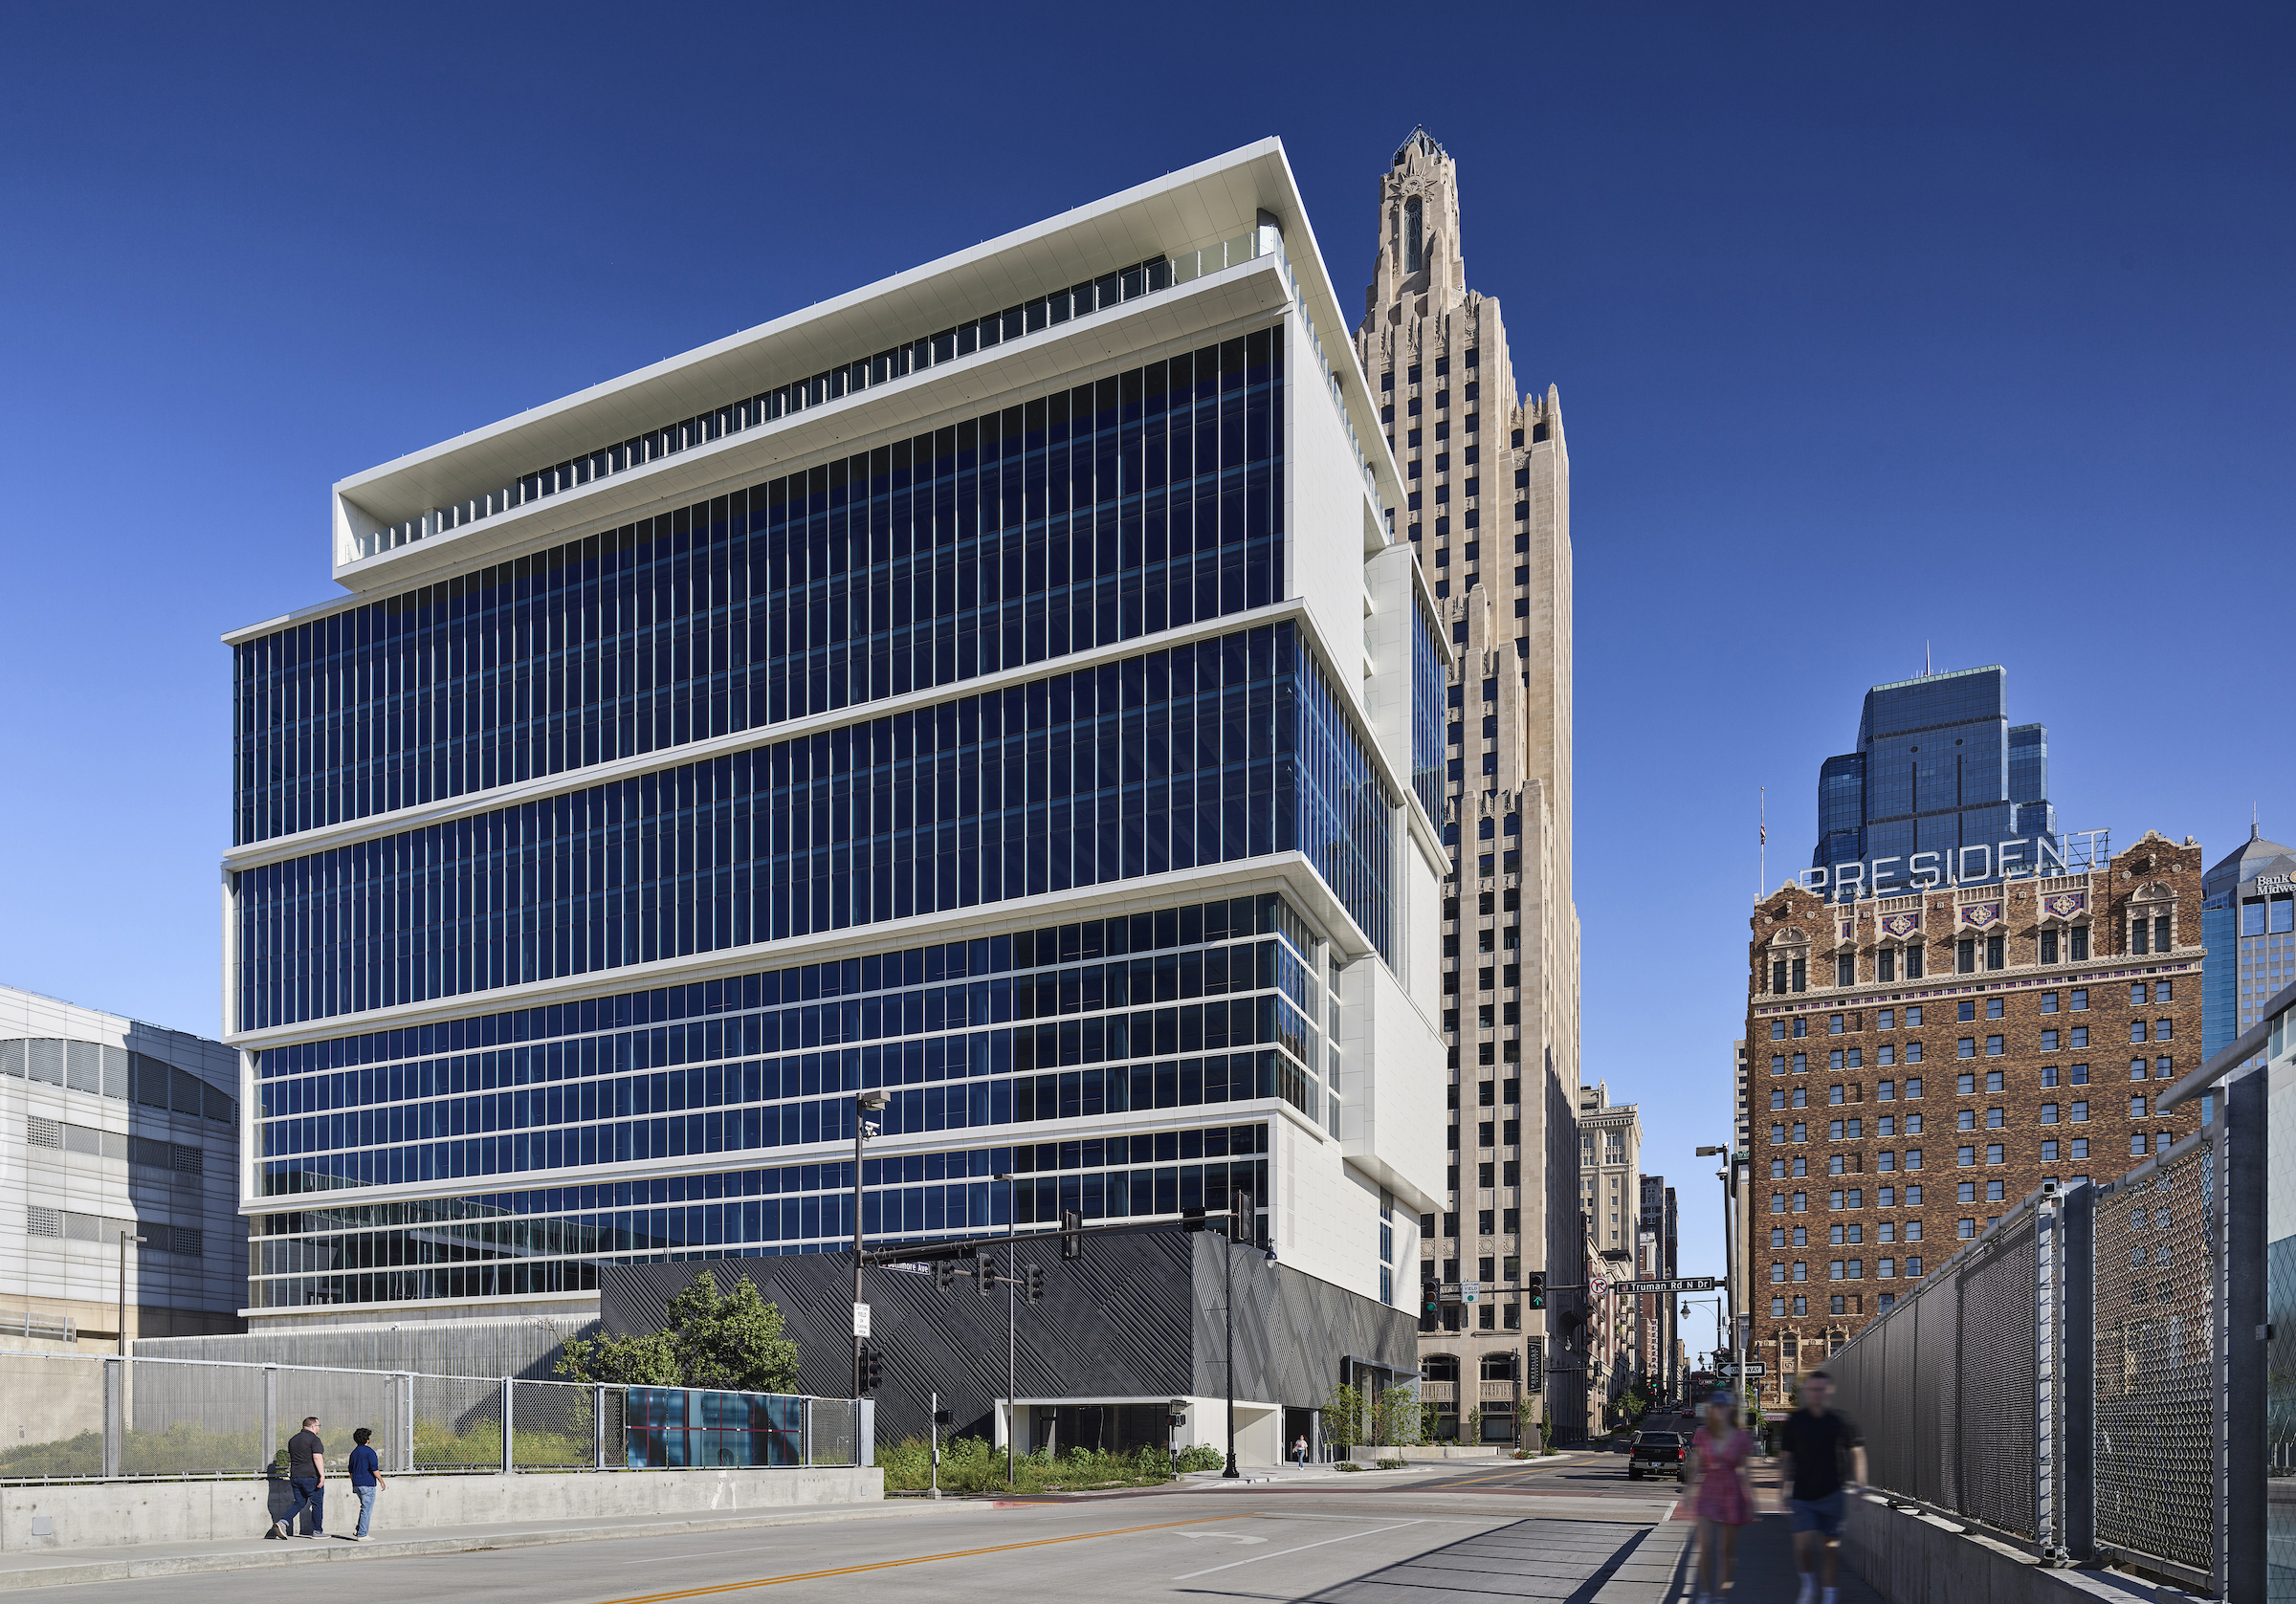 Top 35 Engineering Architecture Firms for 2023 Photo: Kansas City, Mo.’s newest downtown high-rise office tower, 1400KC, sits above a cleverly disguised parking structure